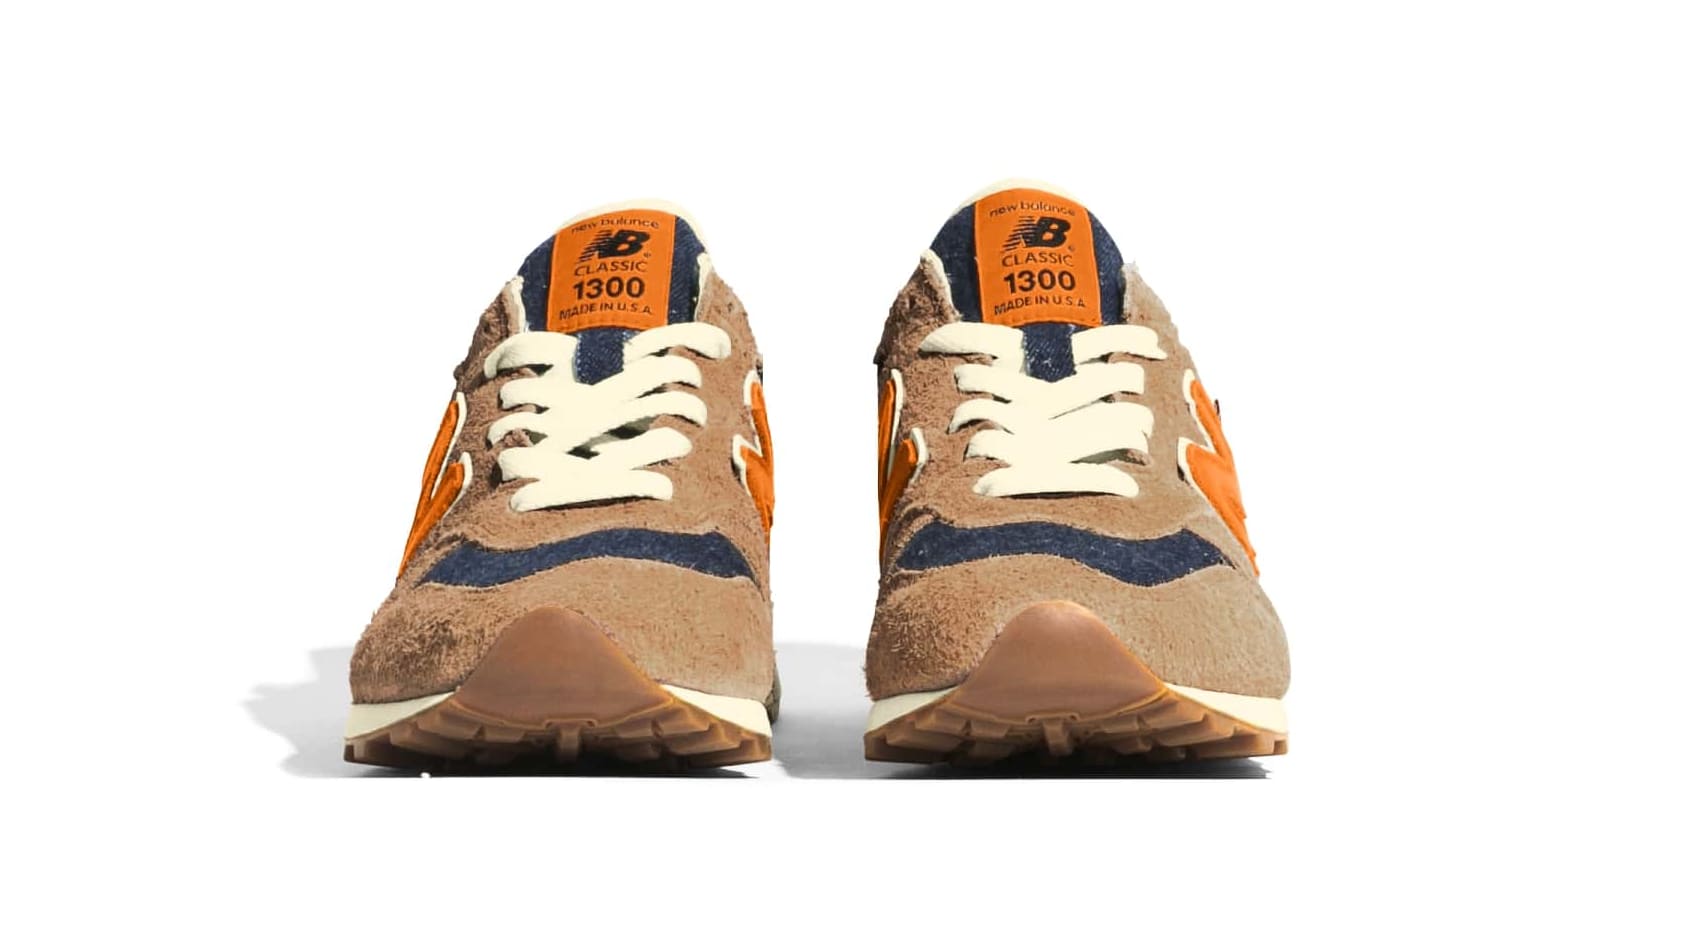 Levi's x New Balance 1300 Release Date | Sole Collector